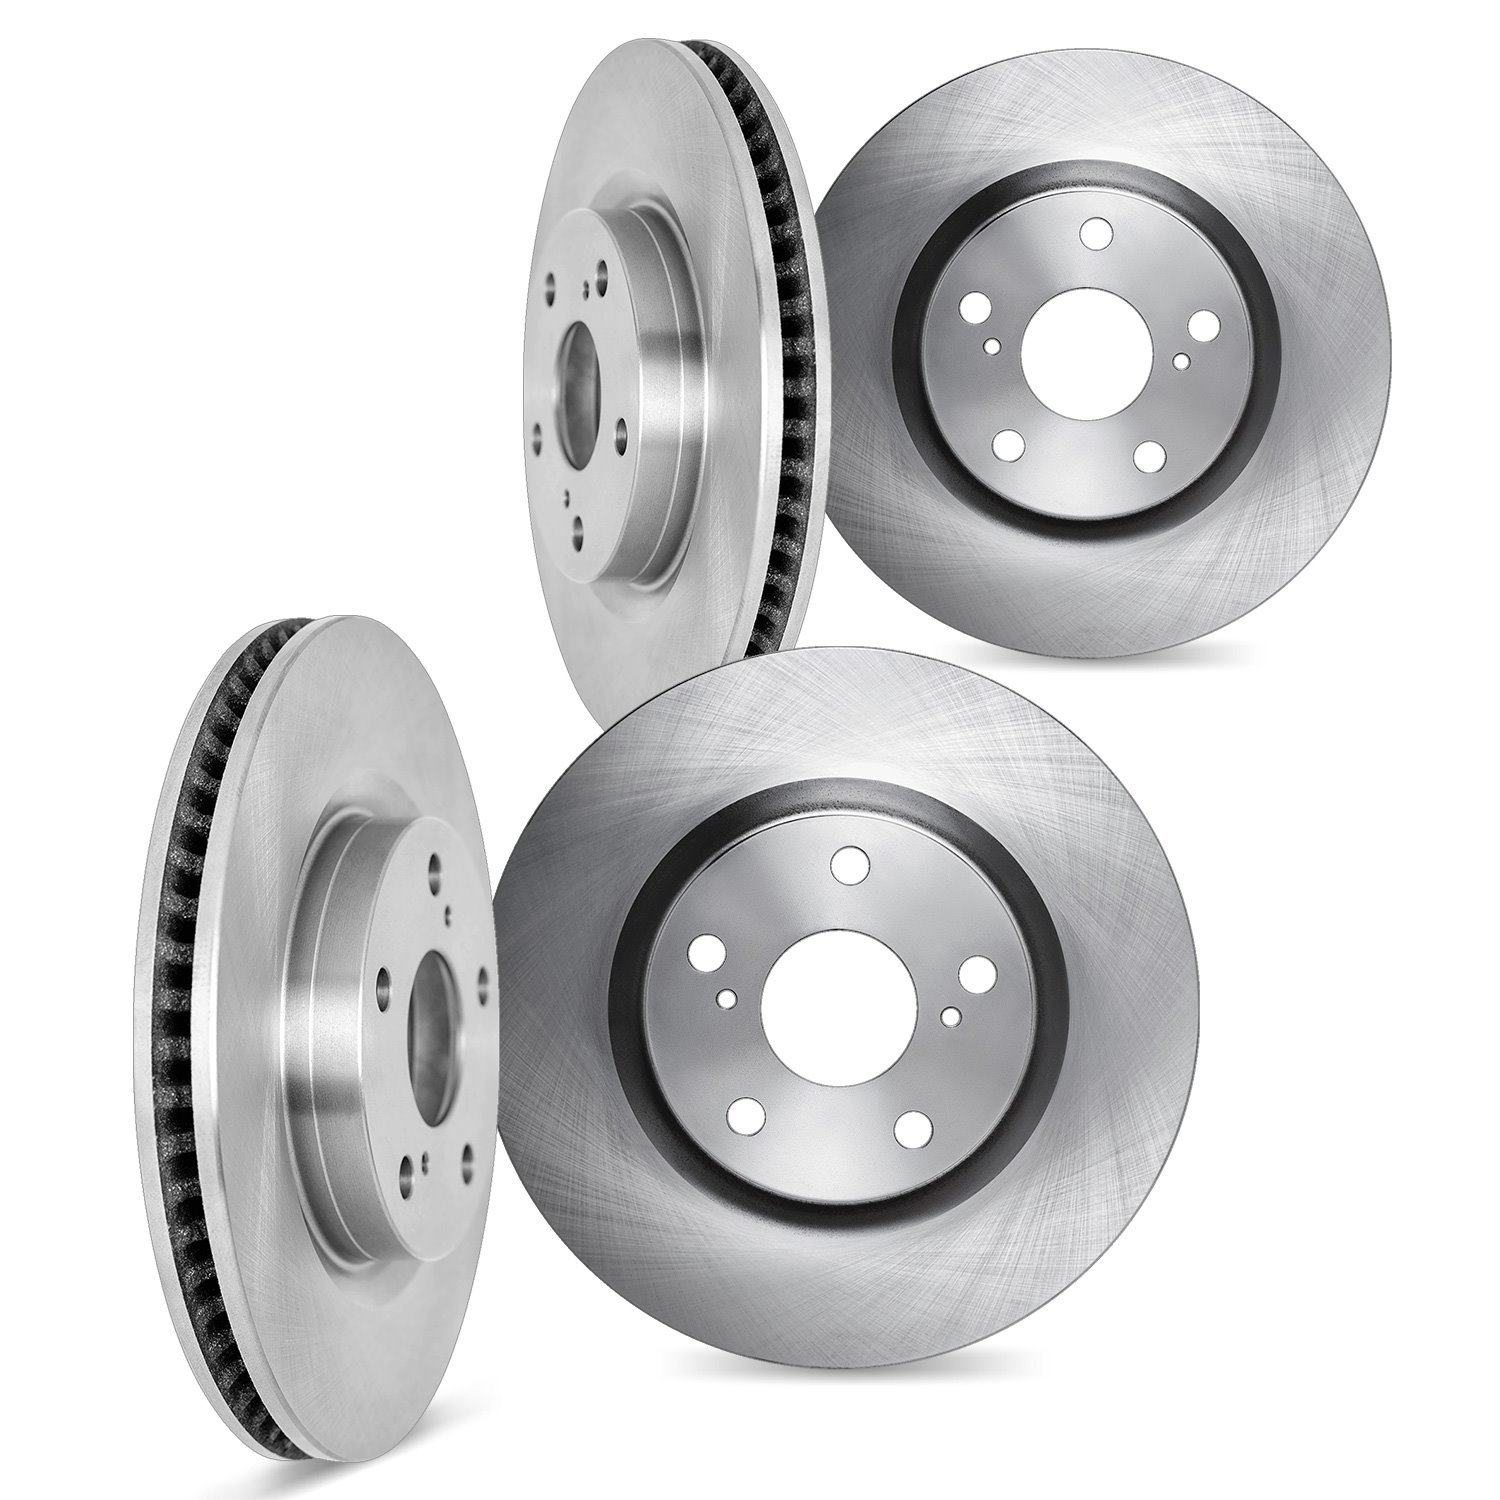 6004-68007 Brake Rotors, Fits Select Infiniti/Nissan, Position: Front and Rear